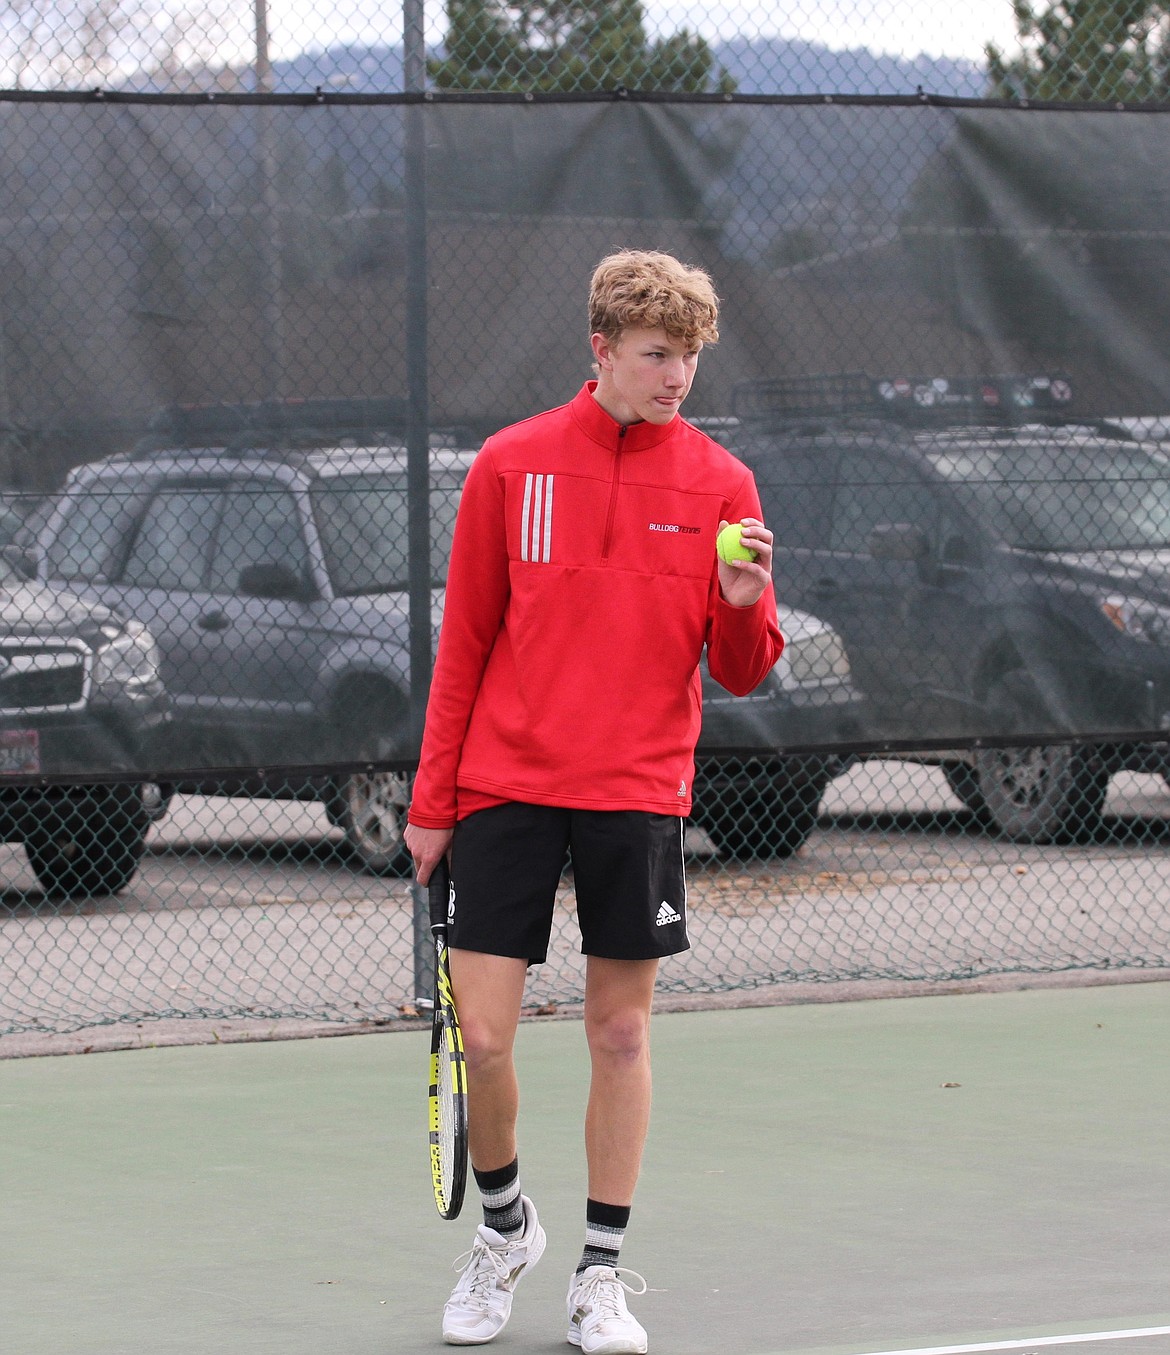 Owen Larson gets ready to serve in his doubles match against Lake City earlier this year.